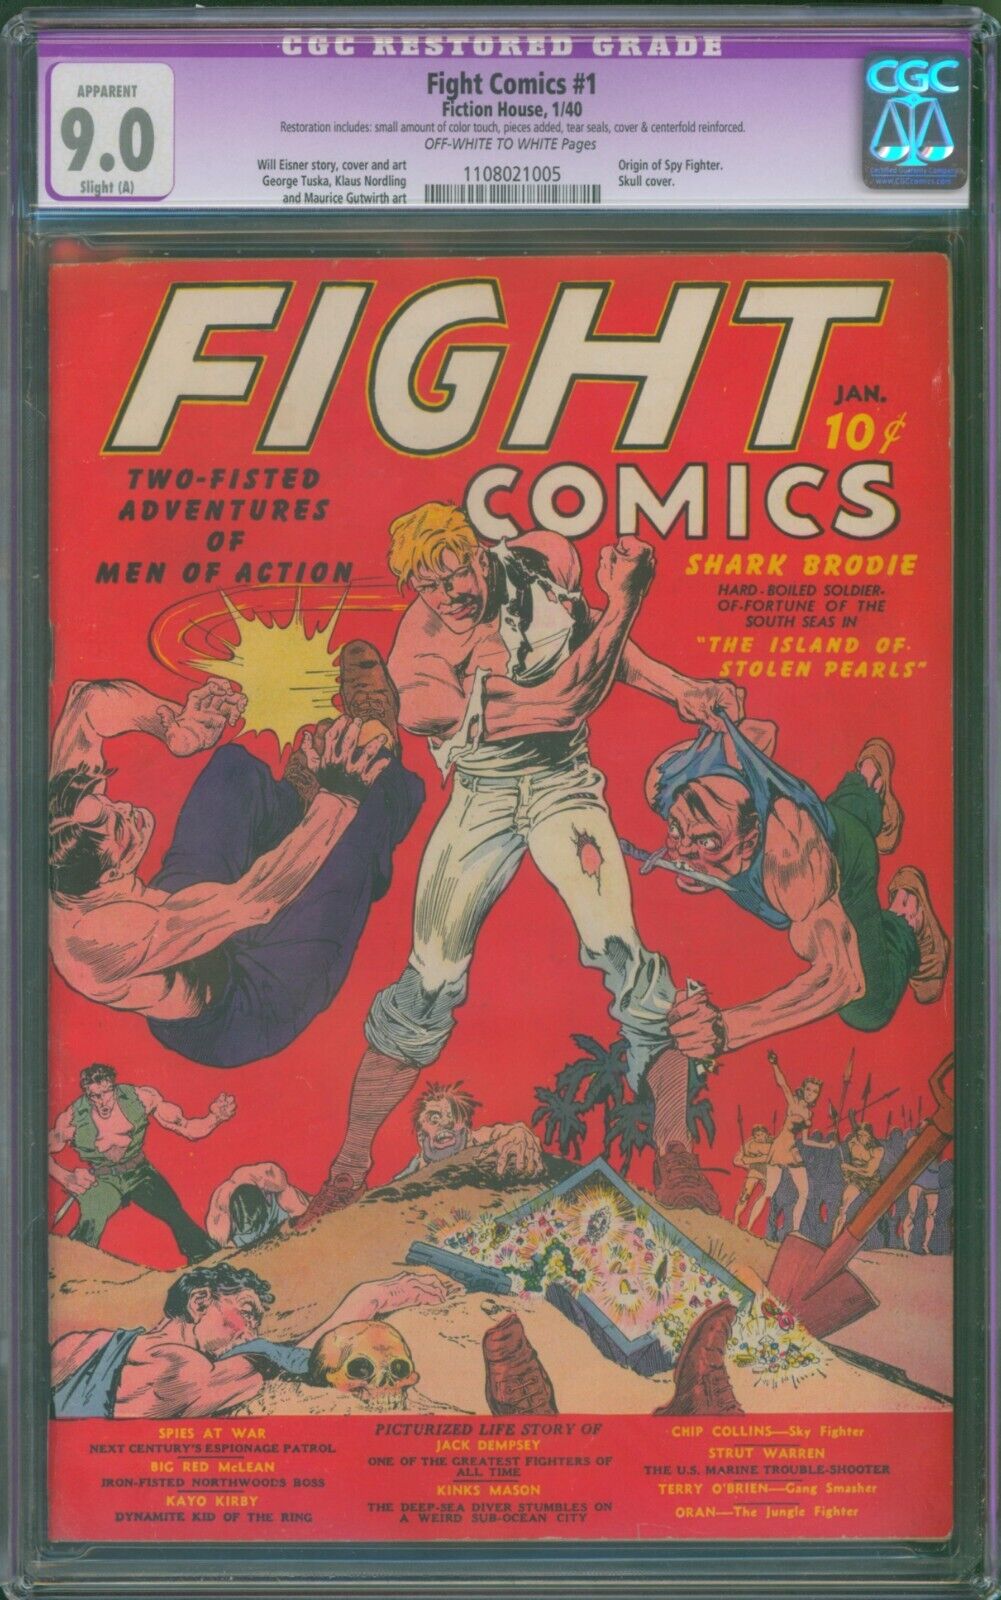 Fight Comics #1 (1940) ⭐ CGC 9.0 Restored ⭐ Spy Fighter Fiction House Golden Age